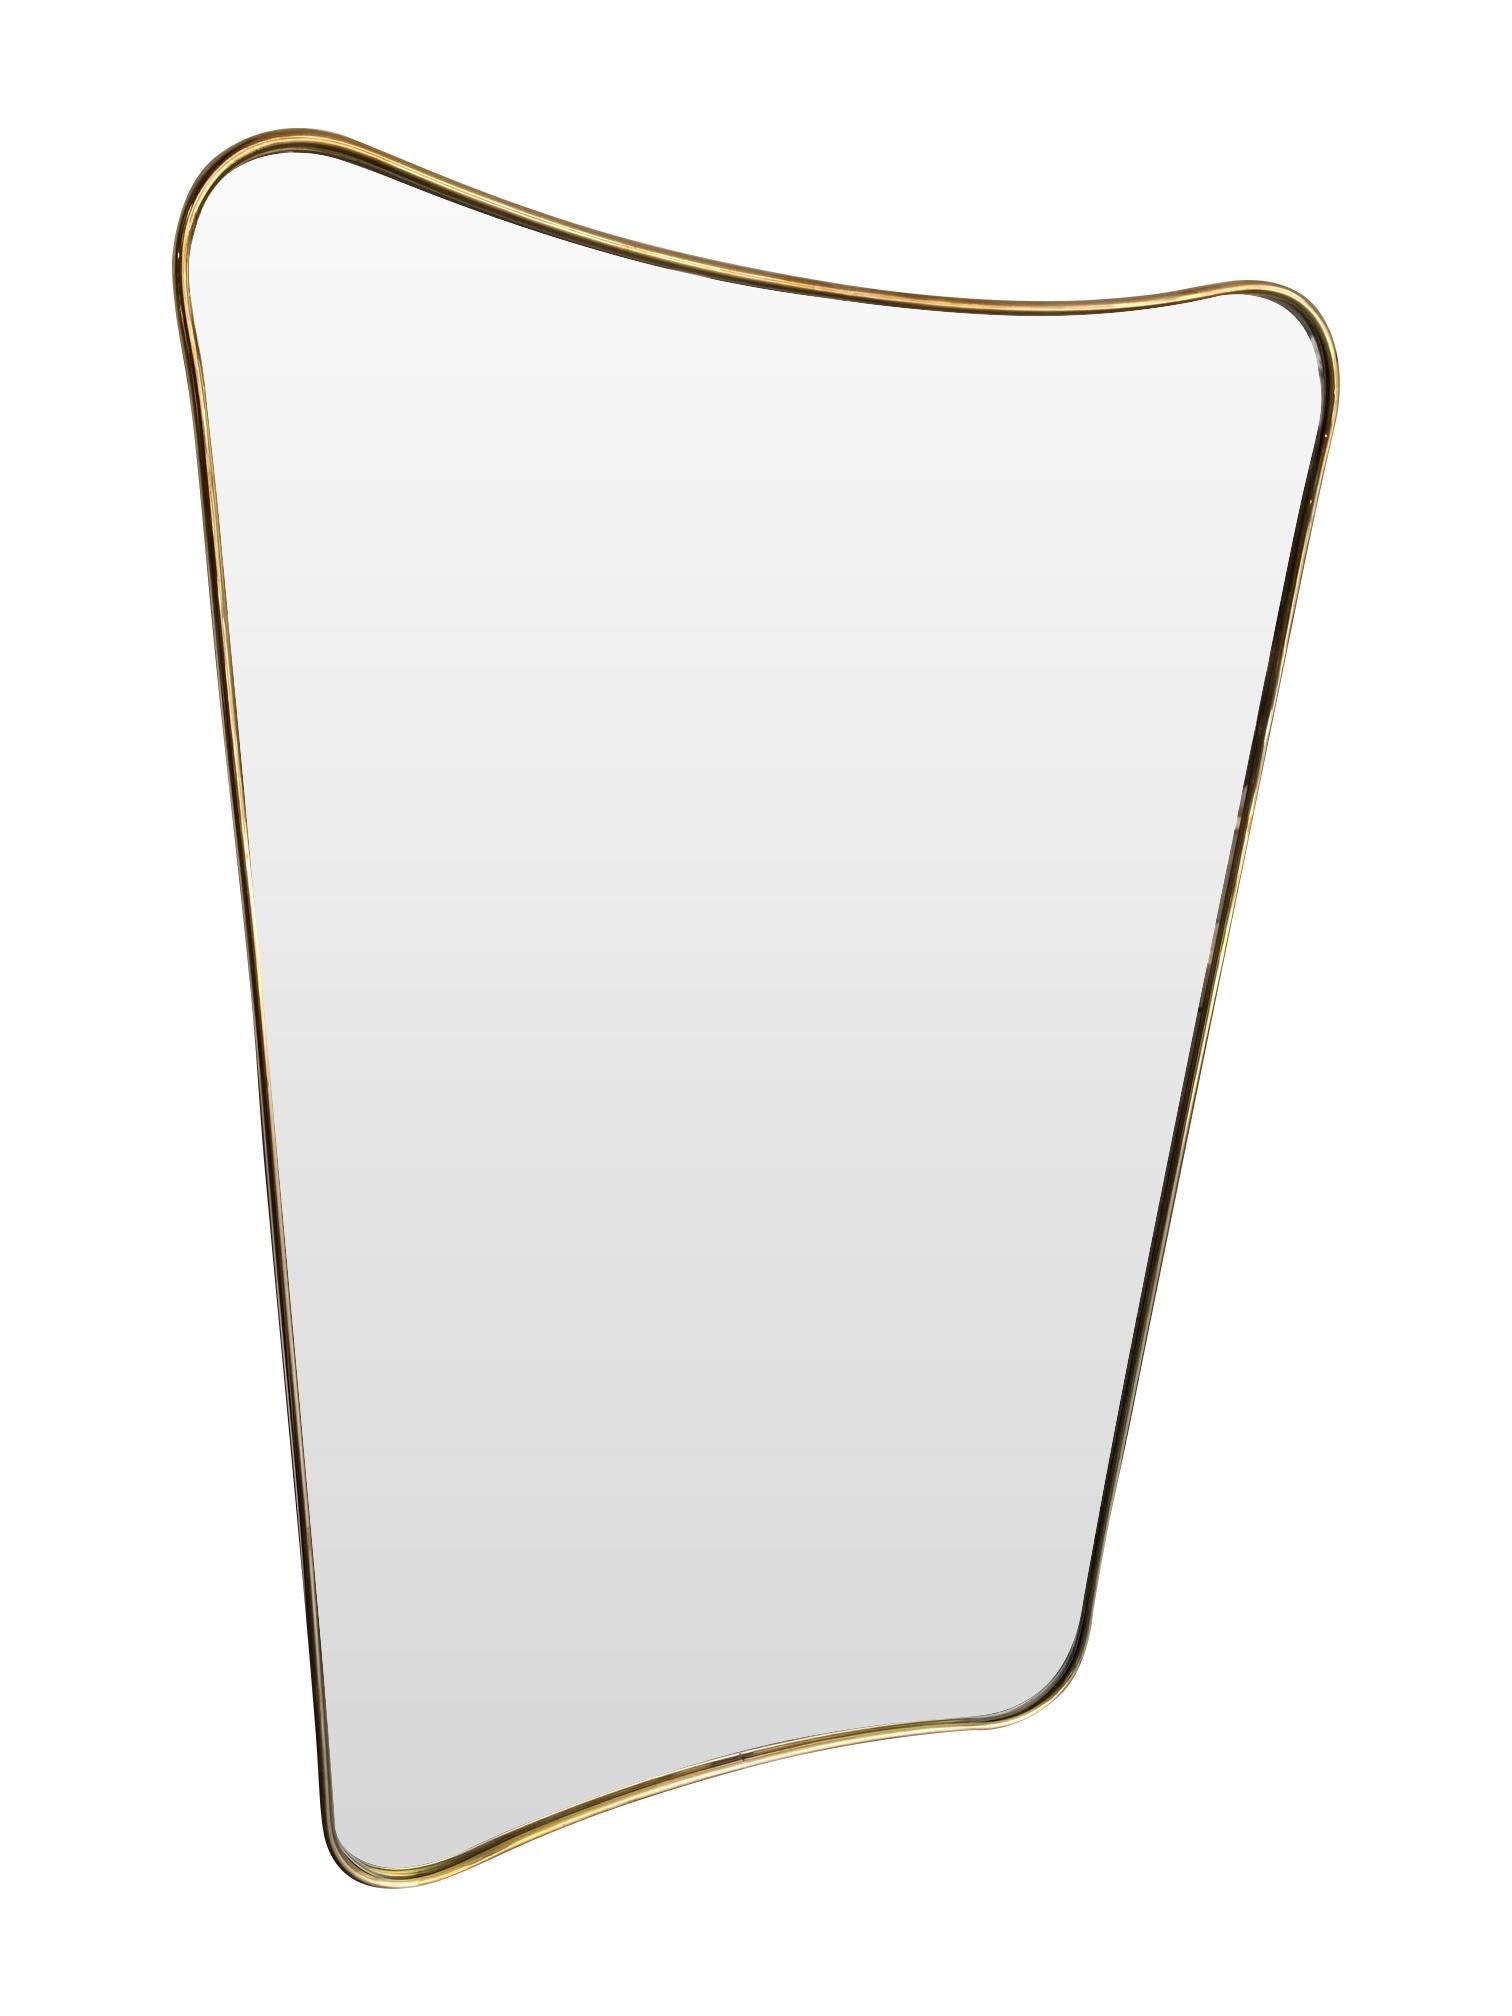 Italian Shield Mirror with Brass Surround in the Style of Gio Ponti 1